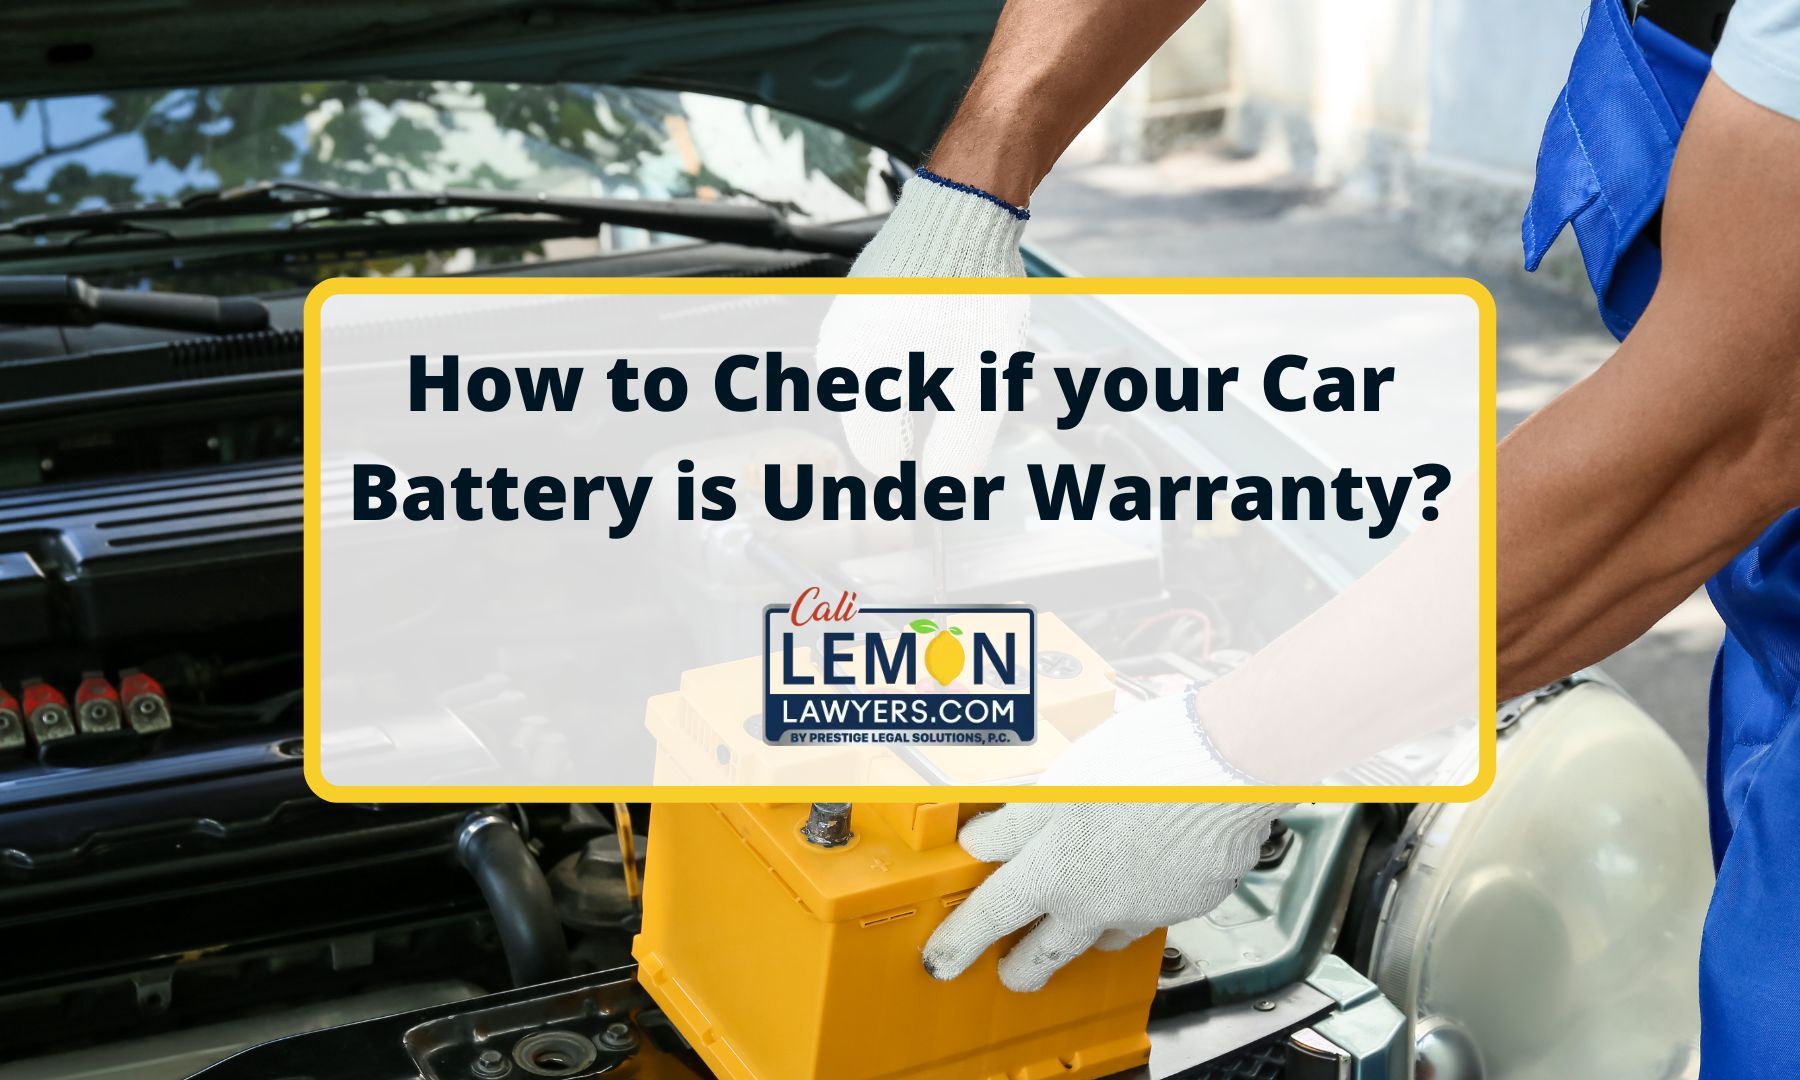 How To Check If Your Car Battery Is Under Warranty